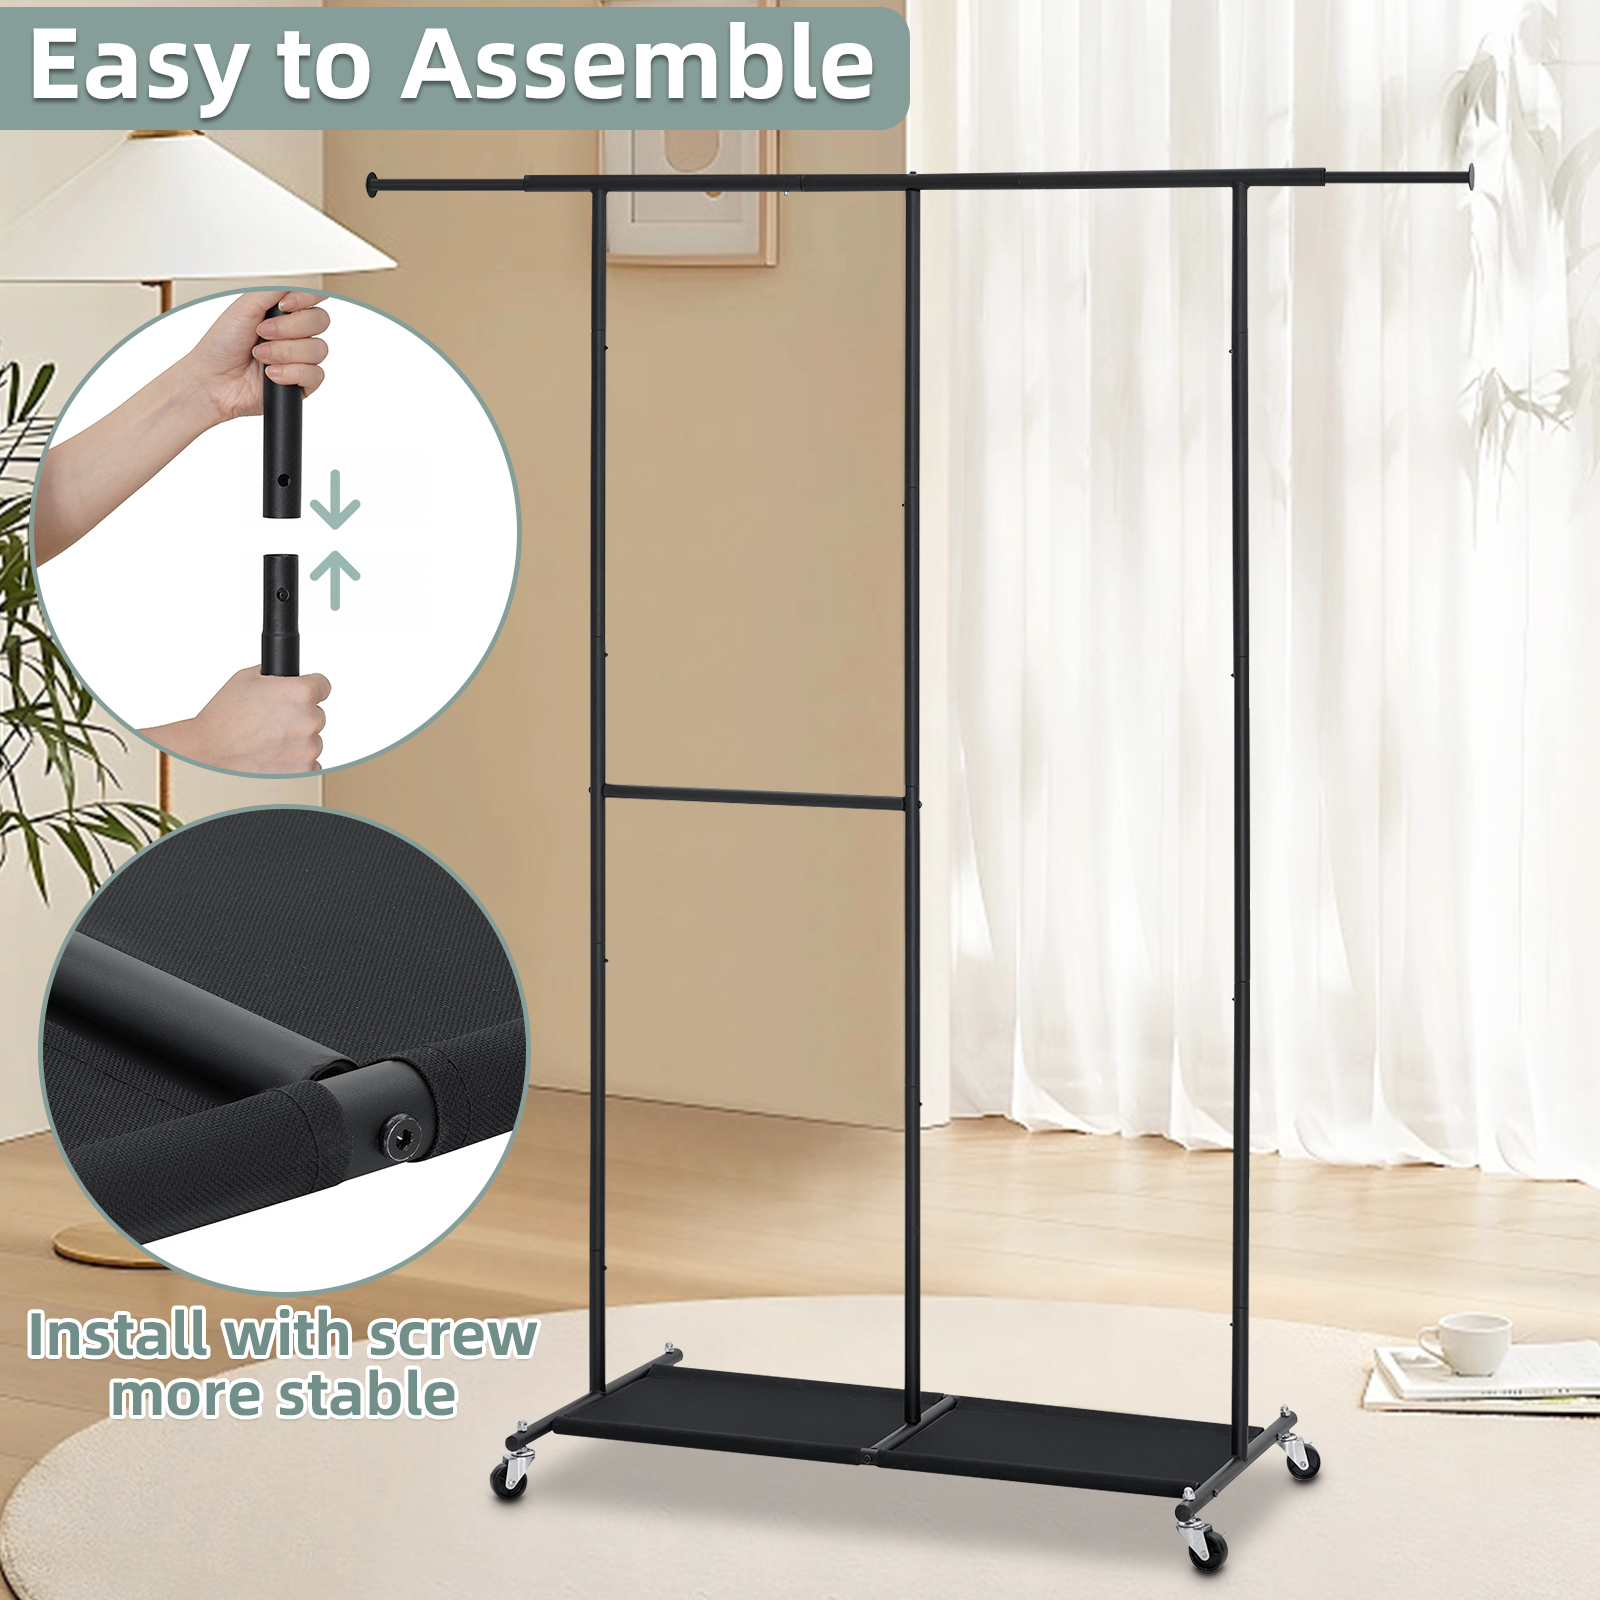 Clothes Rack Garment Rack with Adjustable Length 45-62 inches Metal Rolling Clothing Rack Garment Rack on Wheels for Clothes with 25mm Steel Hanging Pipe, Black - image 4 of 9